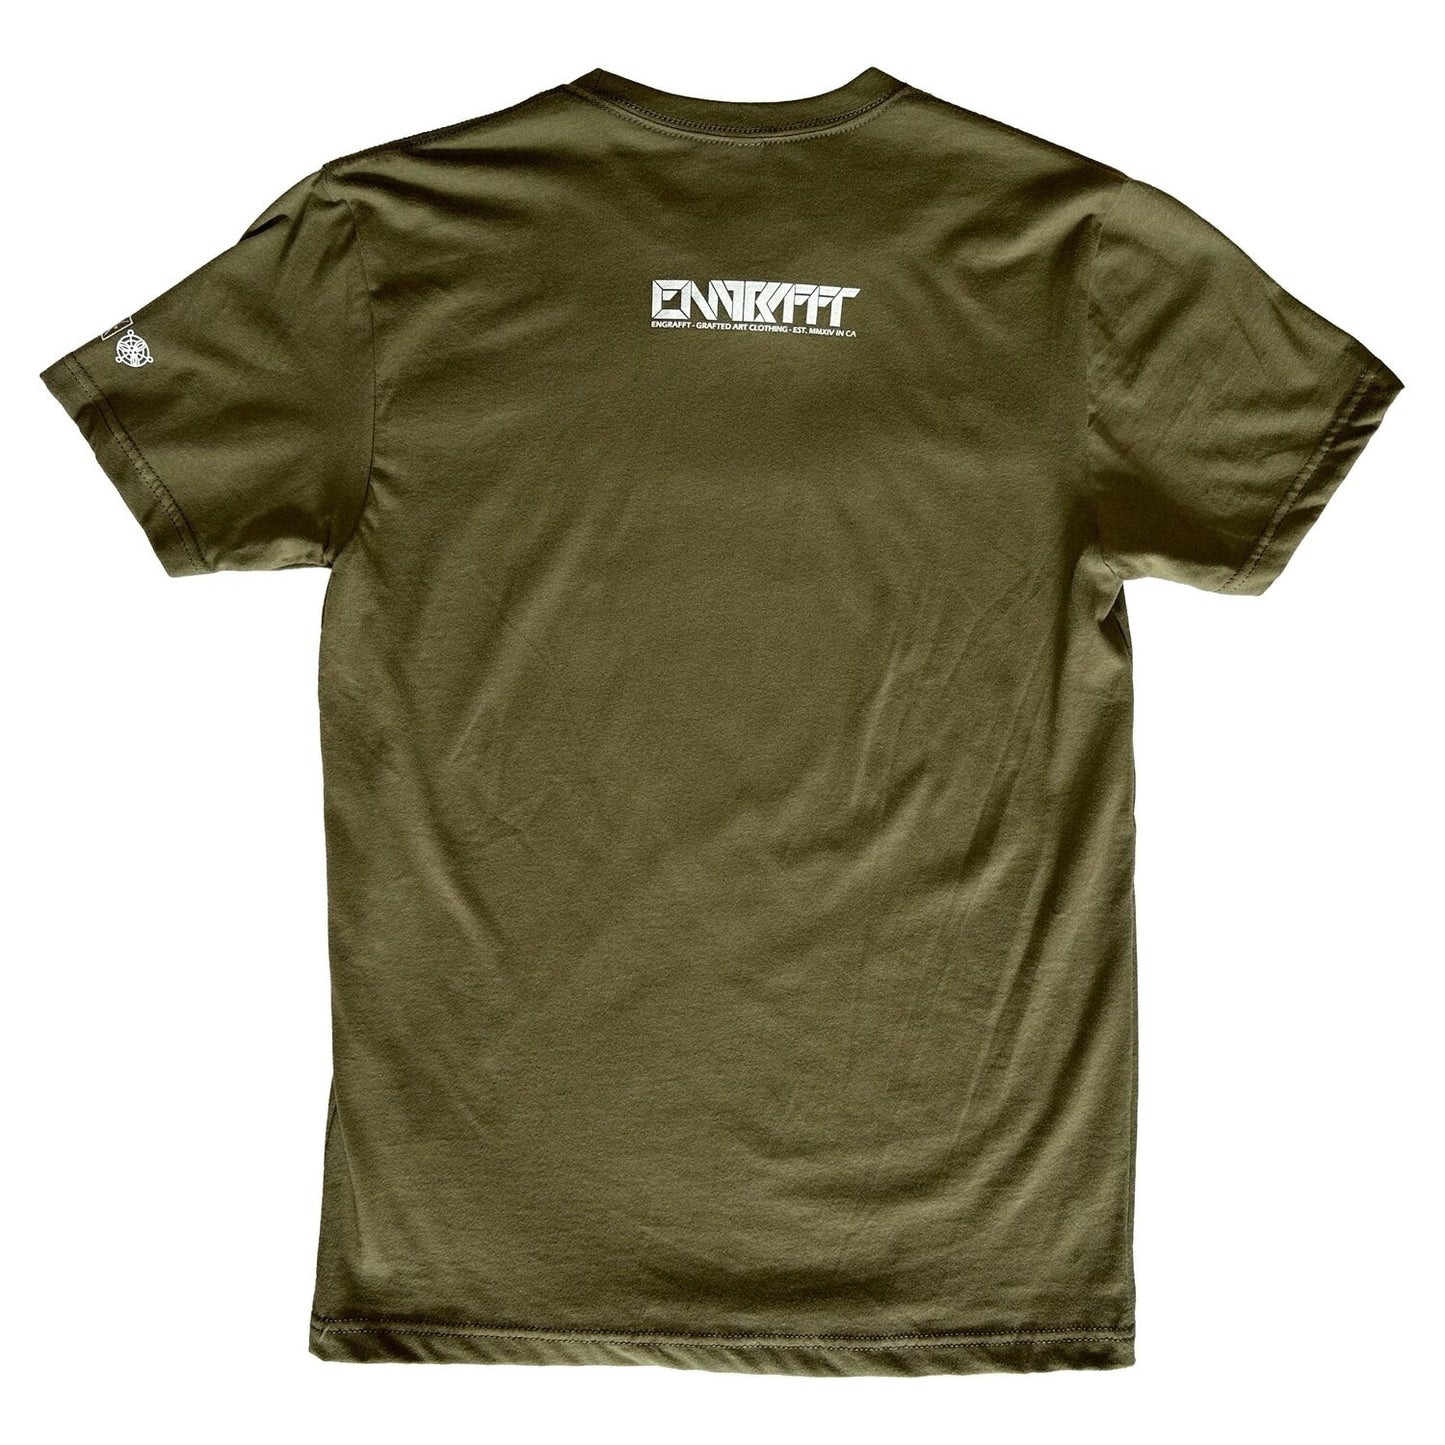 ENGRAFFT - The Grafted Tendril 3 Tee